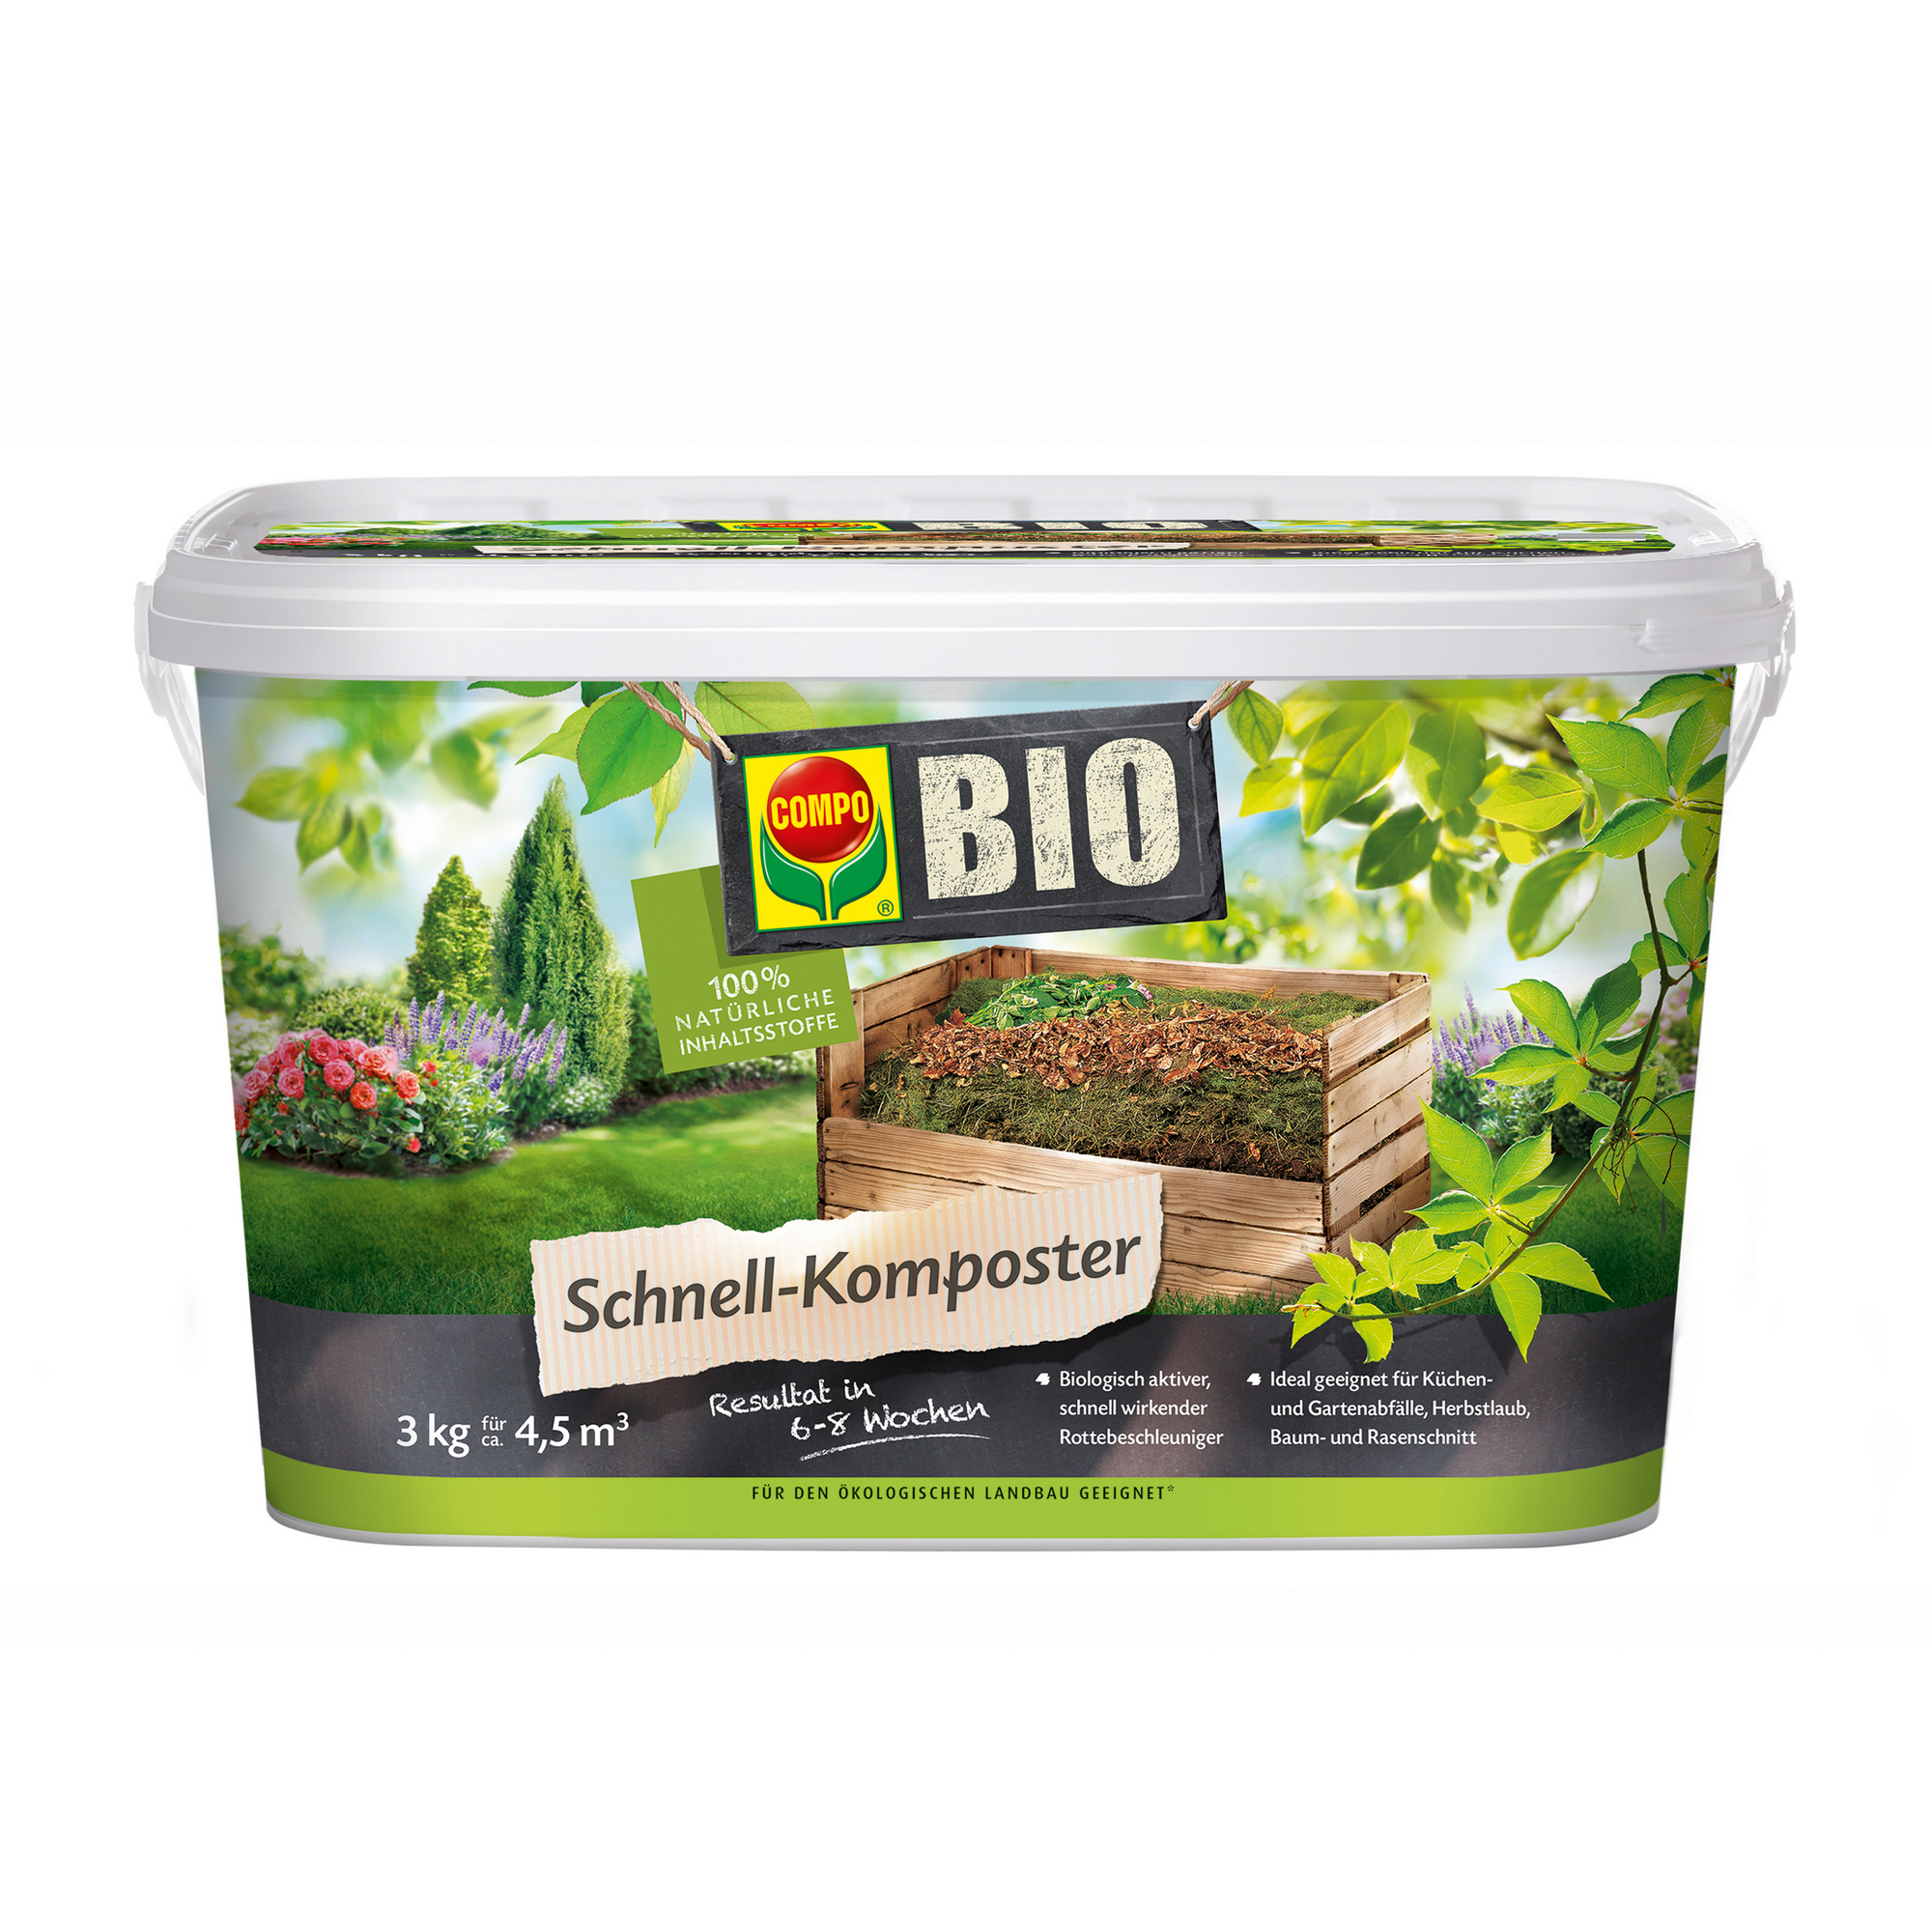 Bio-Schnell-Komposter 3 kg + product picture